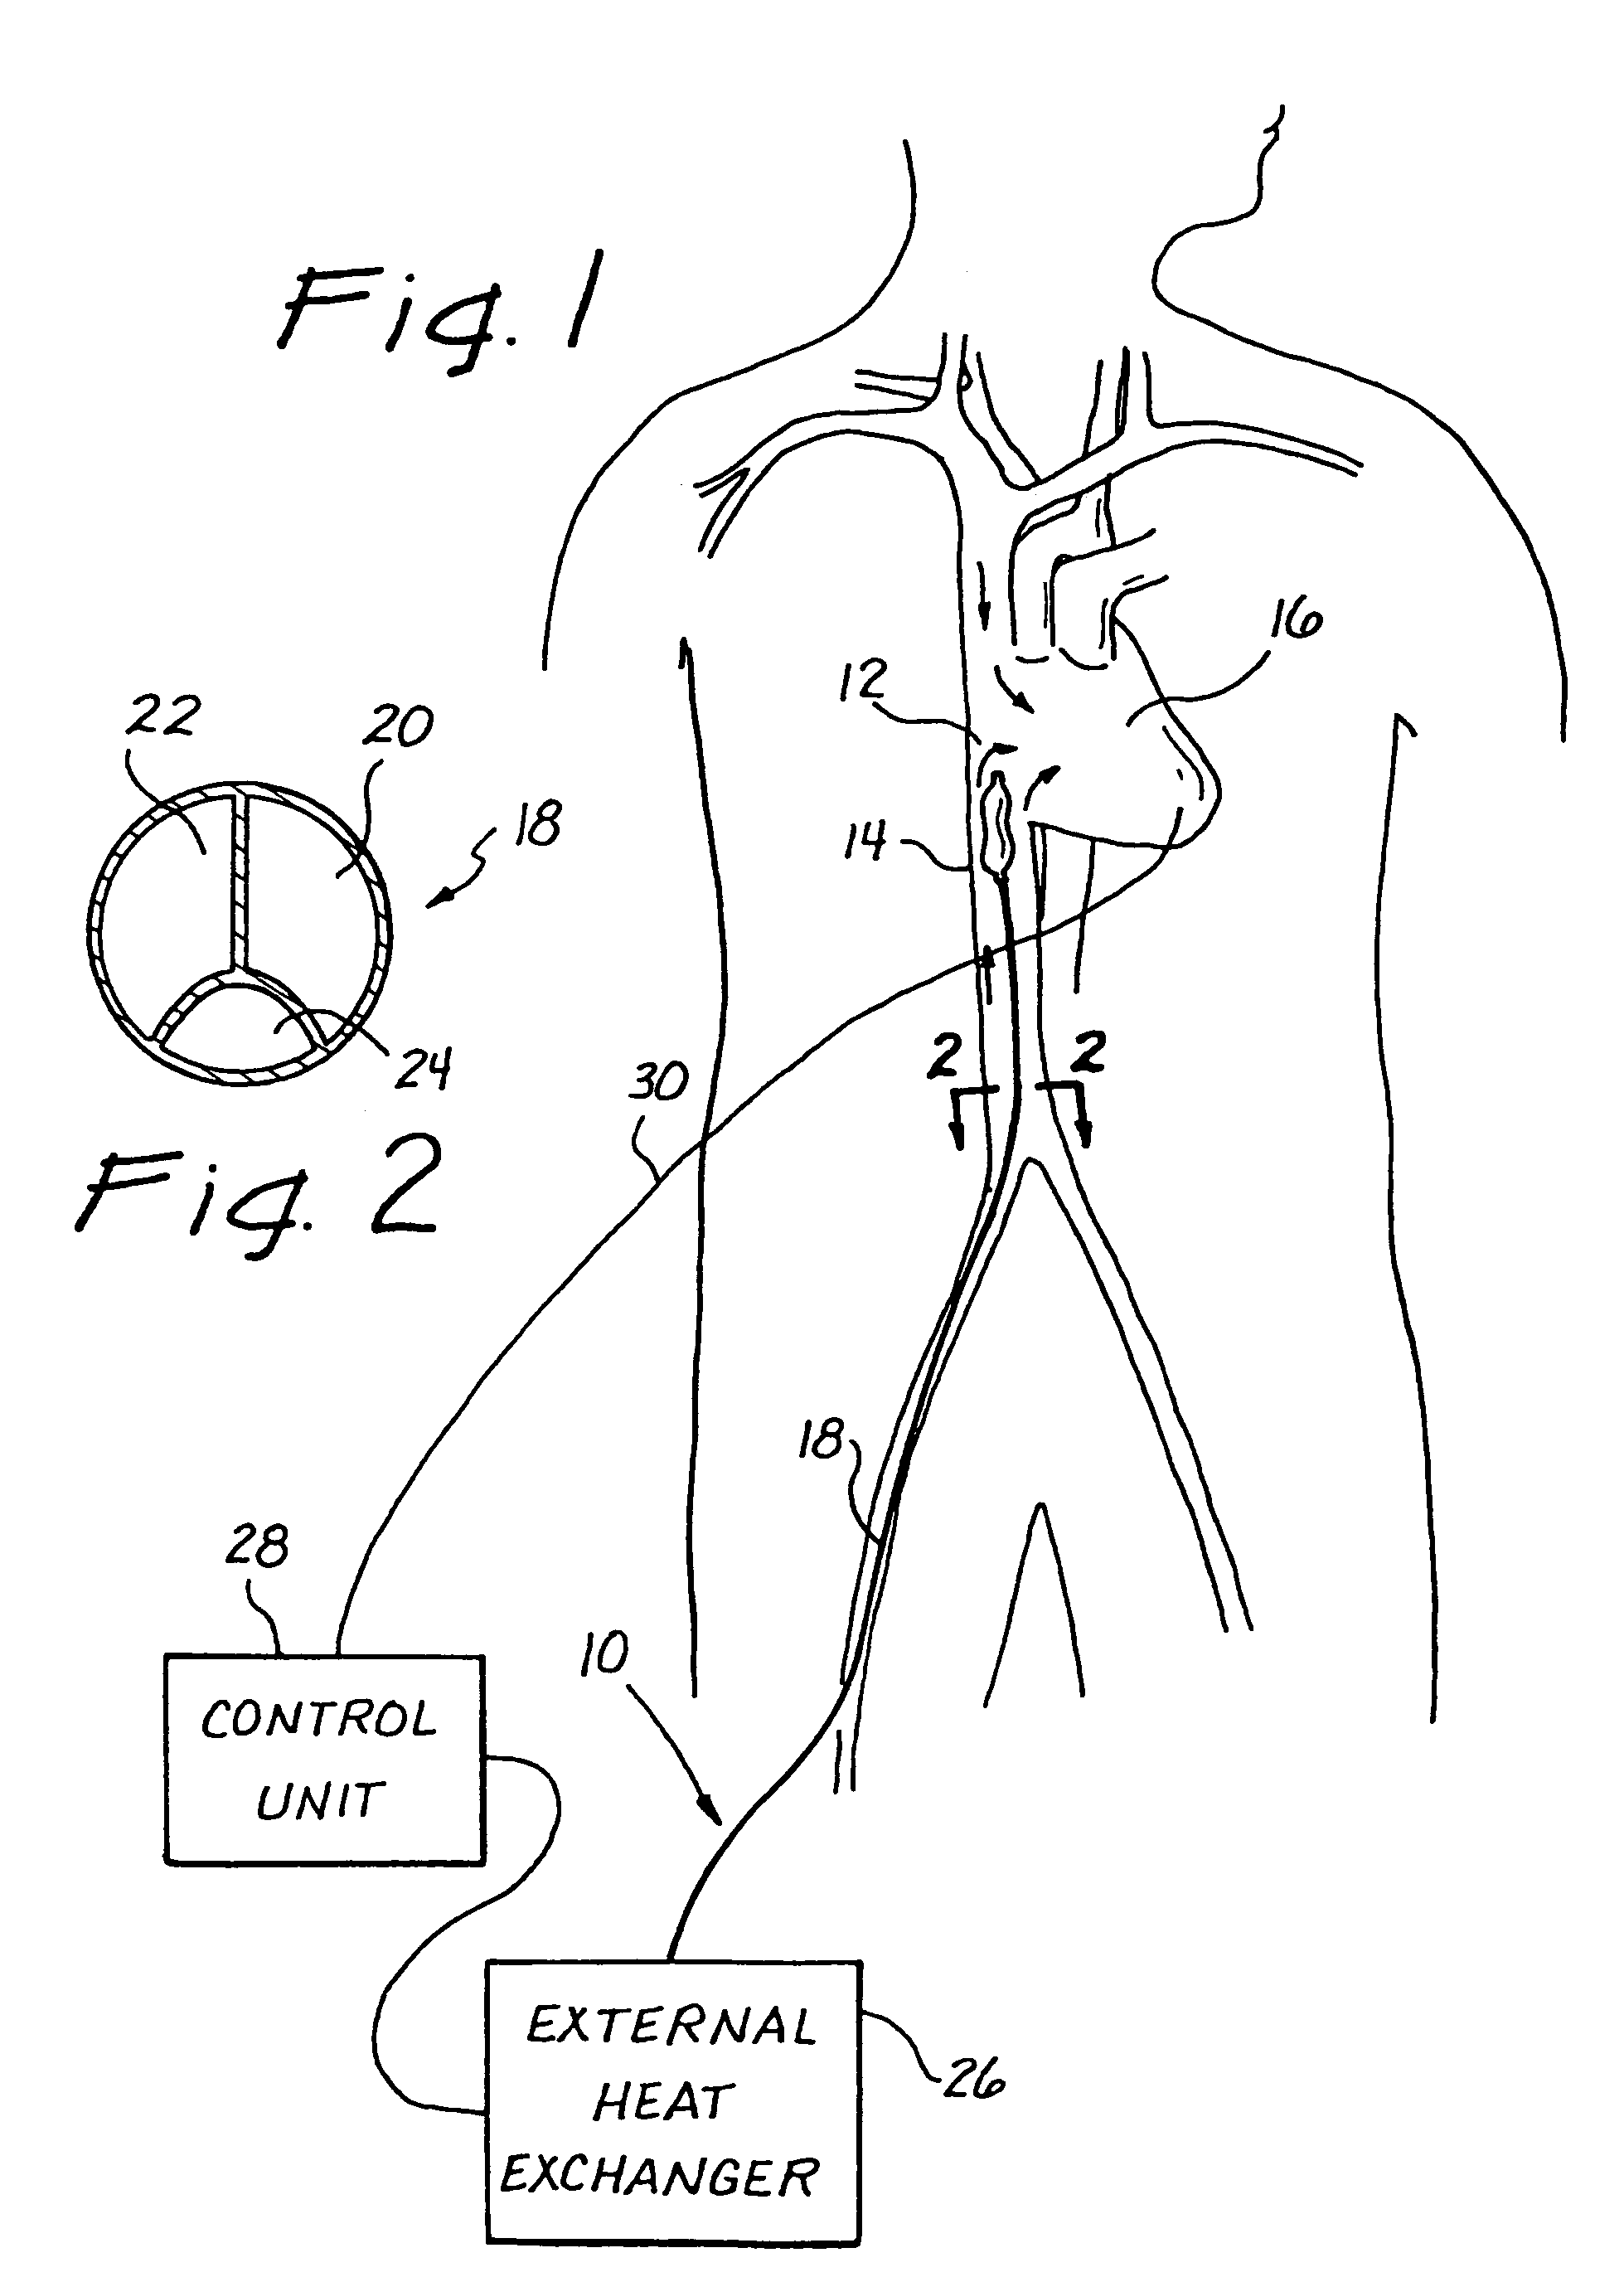 Use of intravascular hypothermia during angioplasty procedures